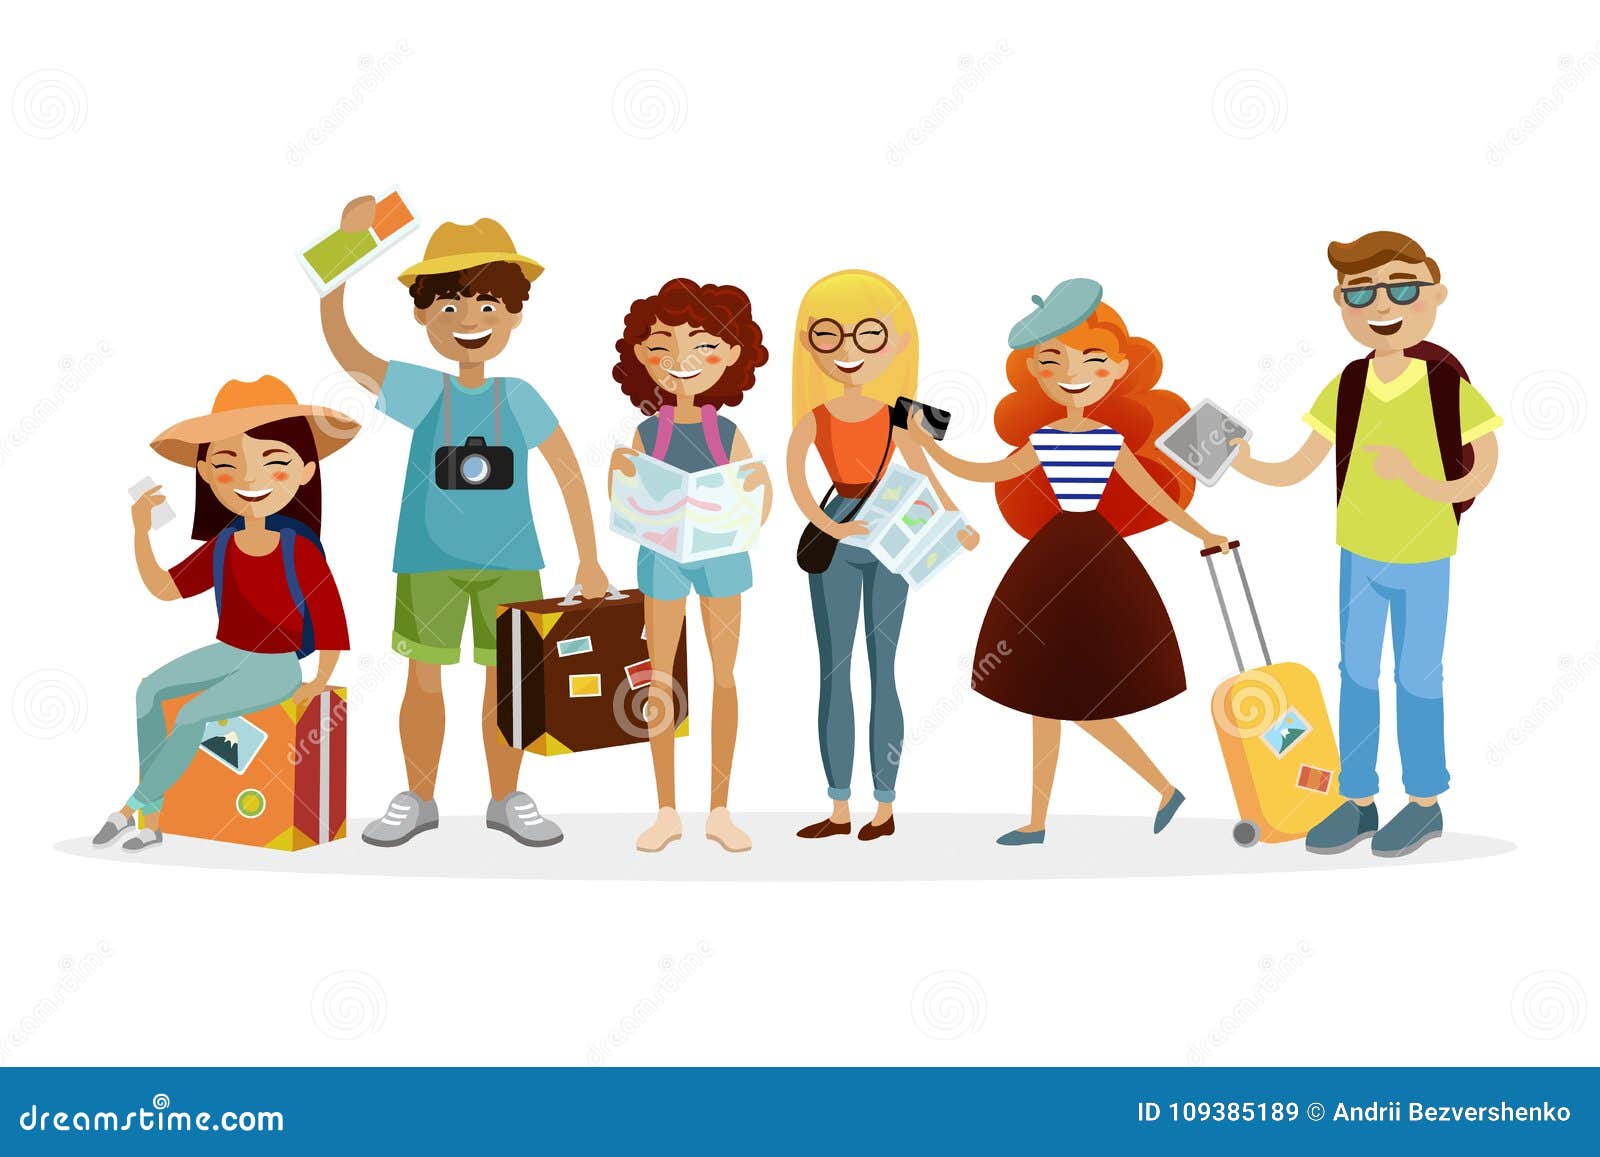 group of tourists cartoon characters flat . young funny people with suitcases are traveling together.